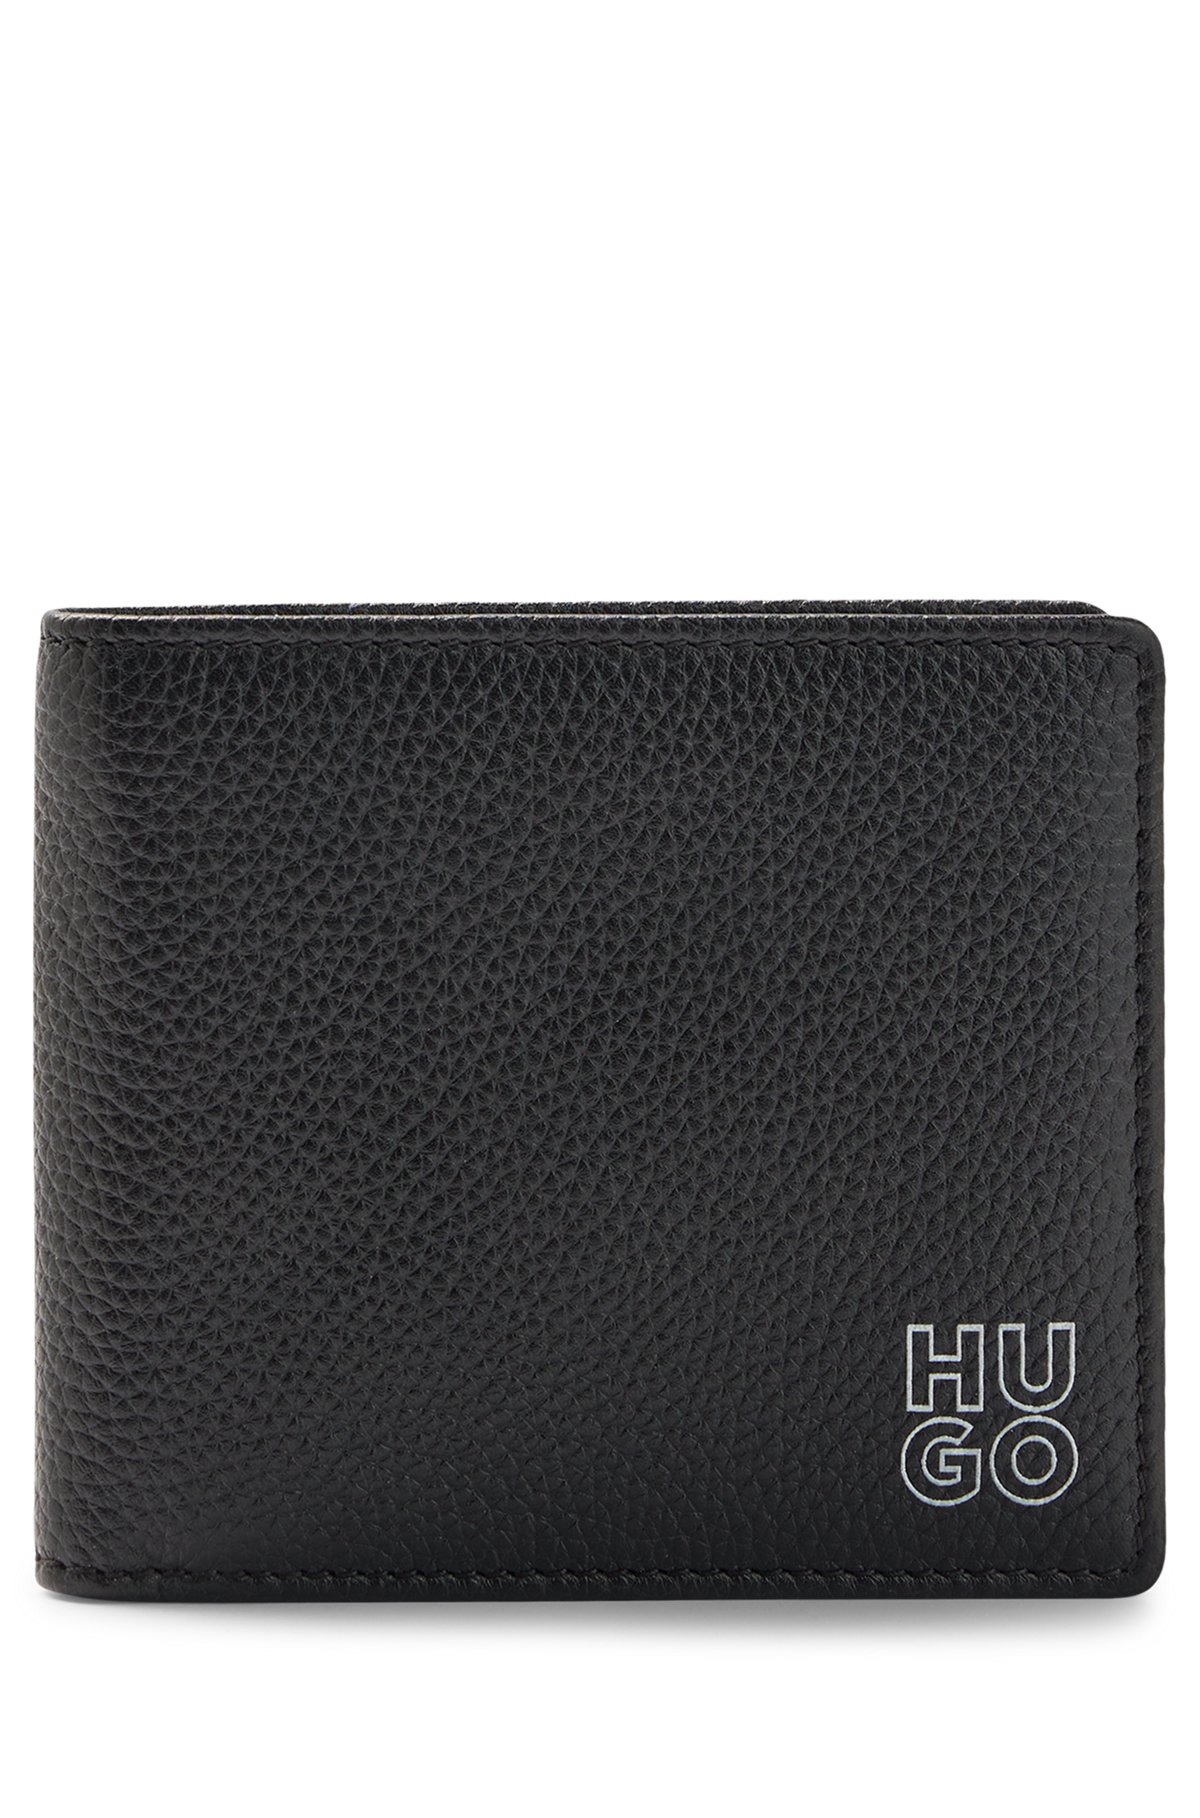 Grained-leather wallet with stacked logo and coin pocket, Black